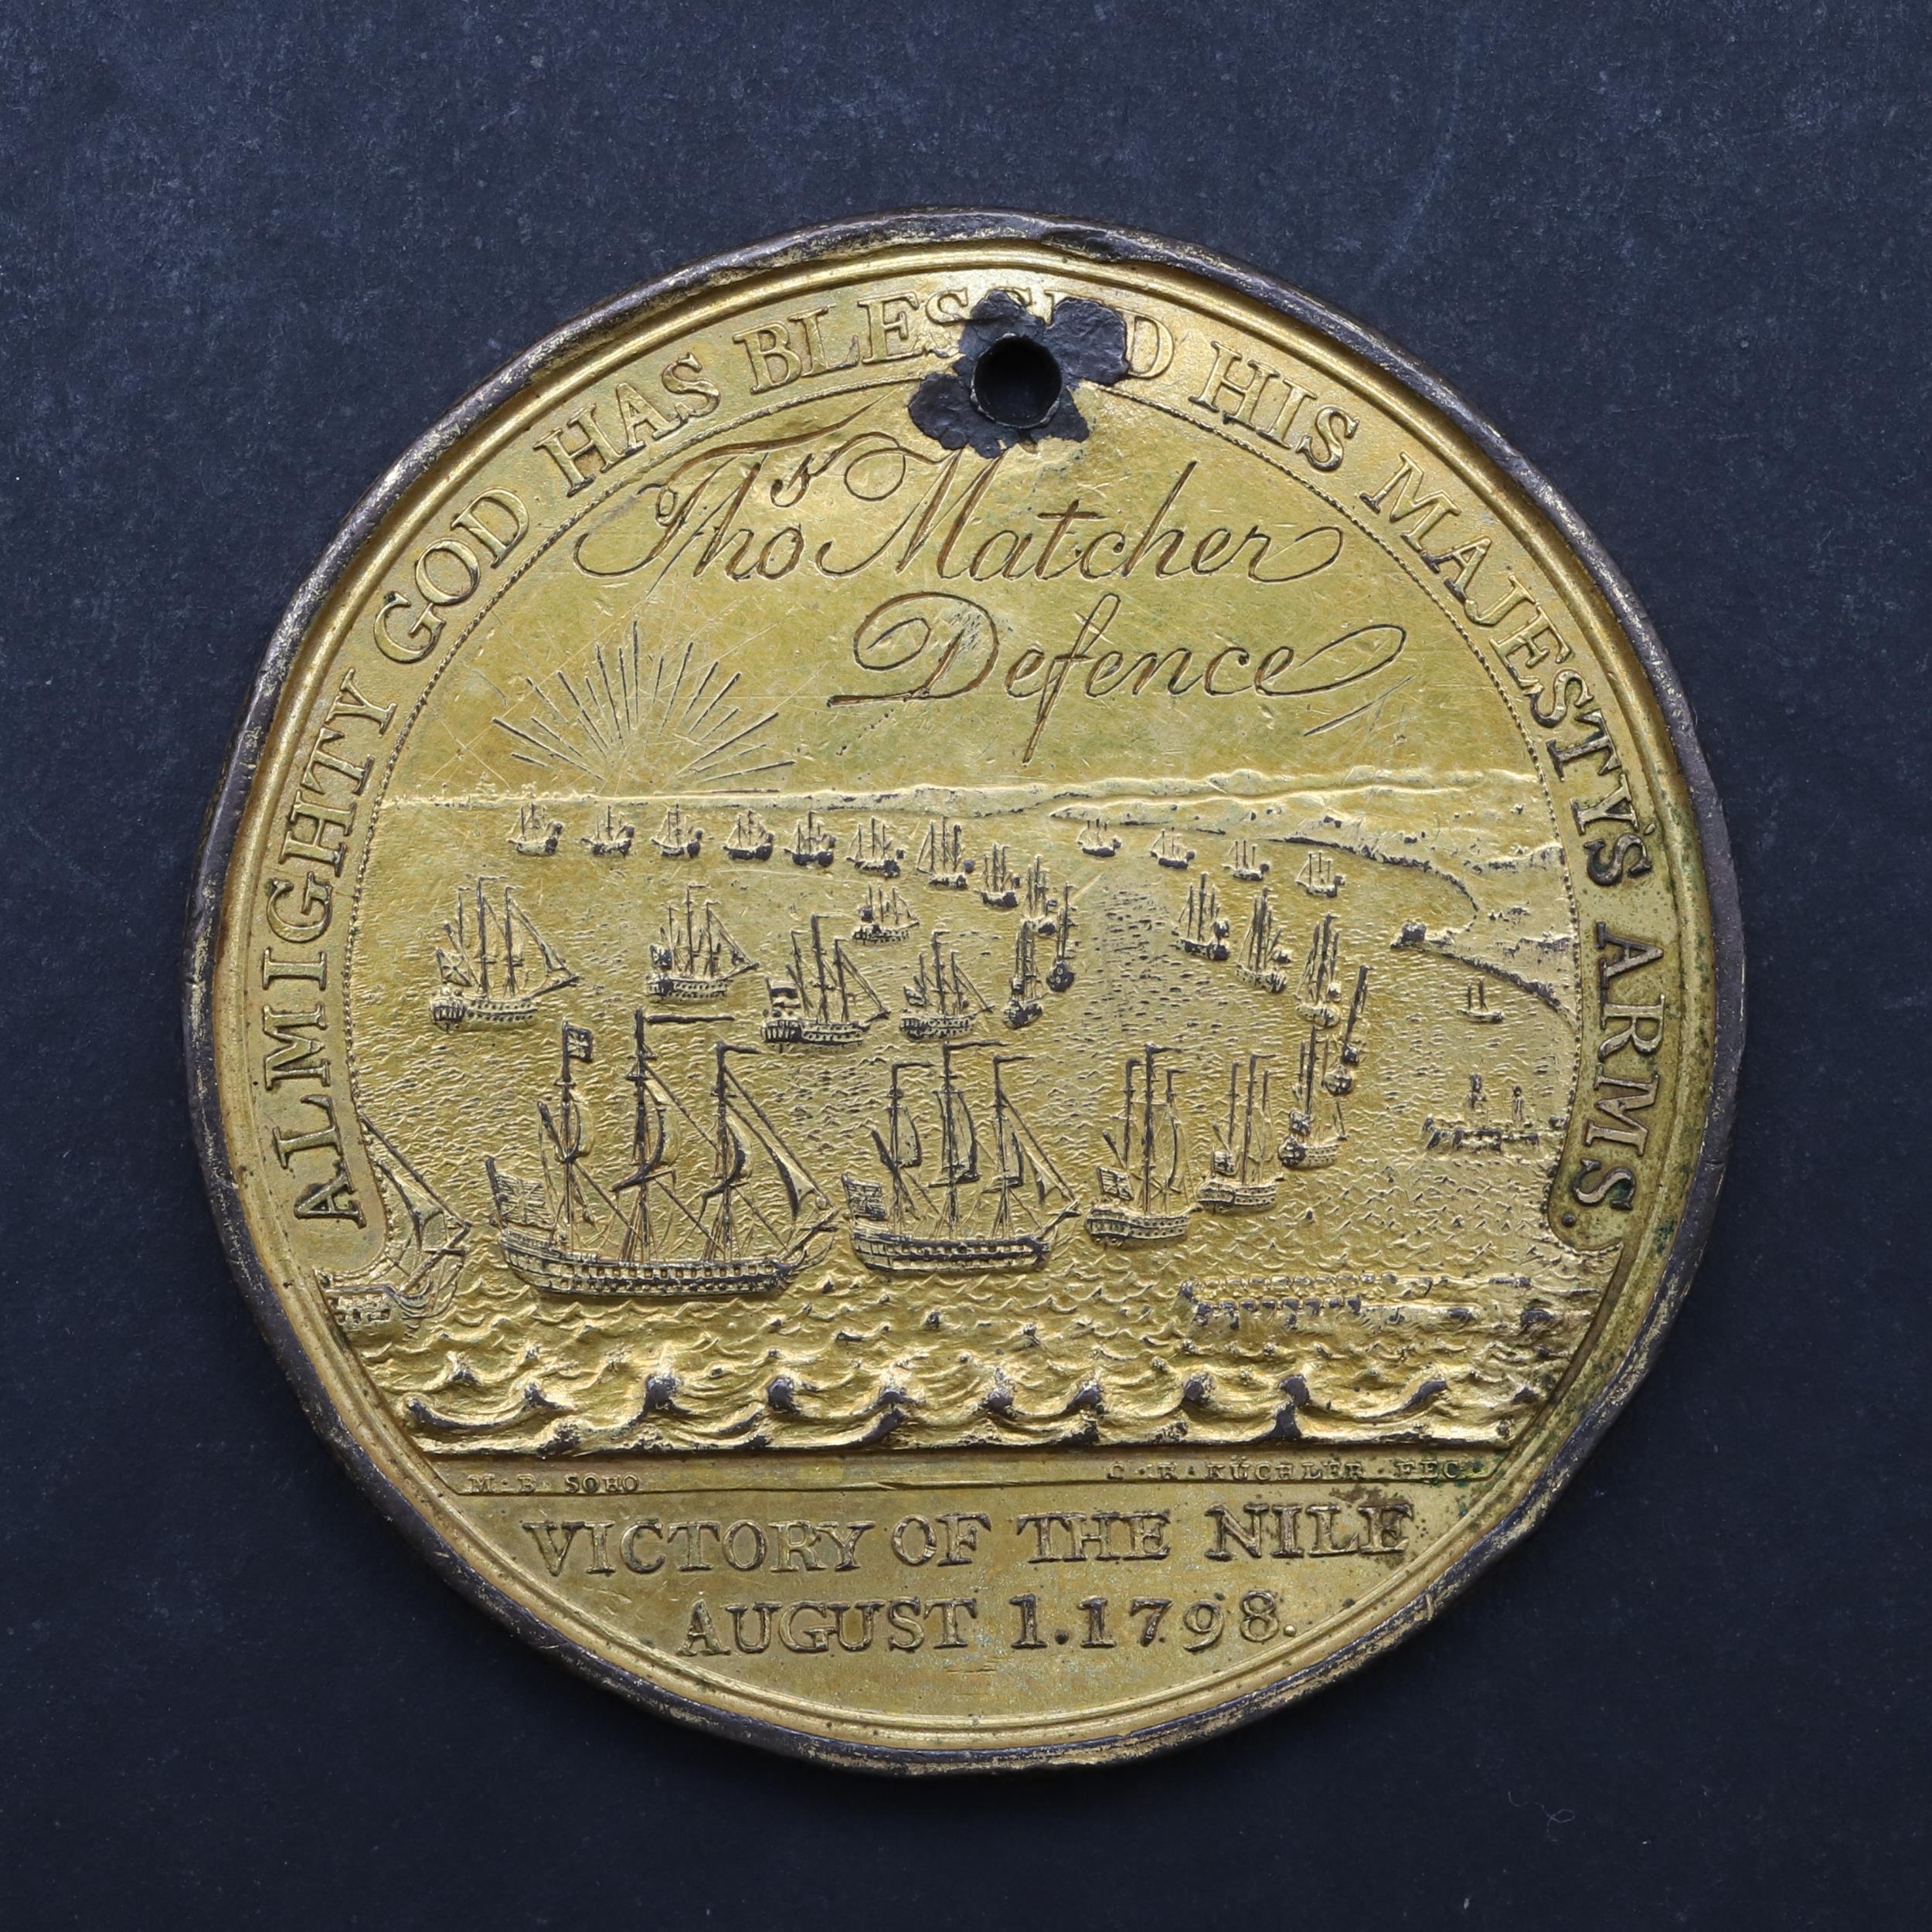 DAVISON'S MEDAL FOR THE BATTLE OF THE NILE, 1798, AWARDED TO THOMAS MATCHER, DEFENCE. - Image 2 of 5